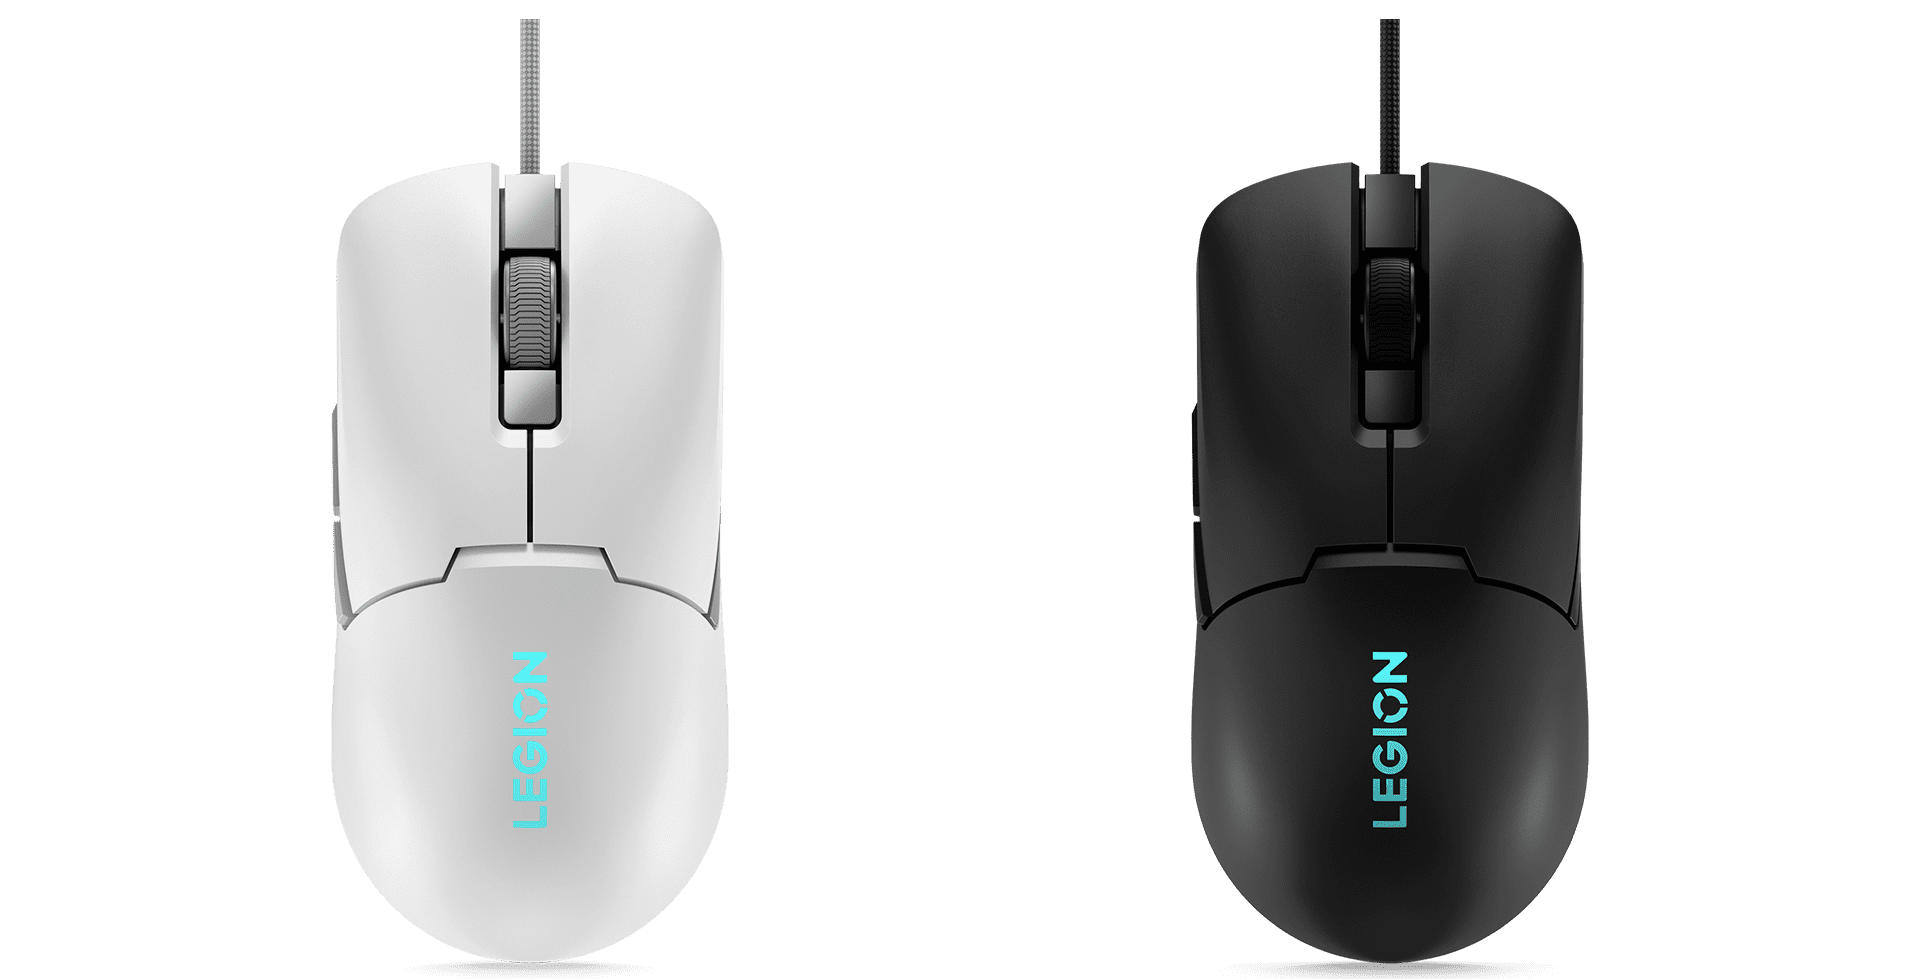 The Lenovo Legion M300s RGB Gaming Mouse comes in complementary colors to latest Legion PCs